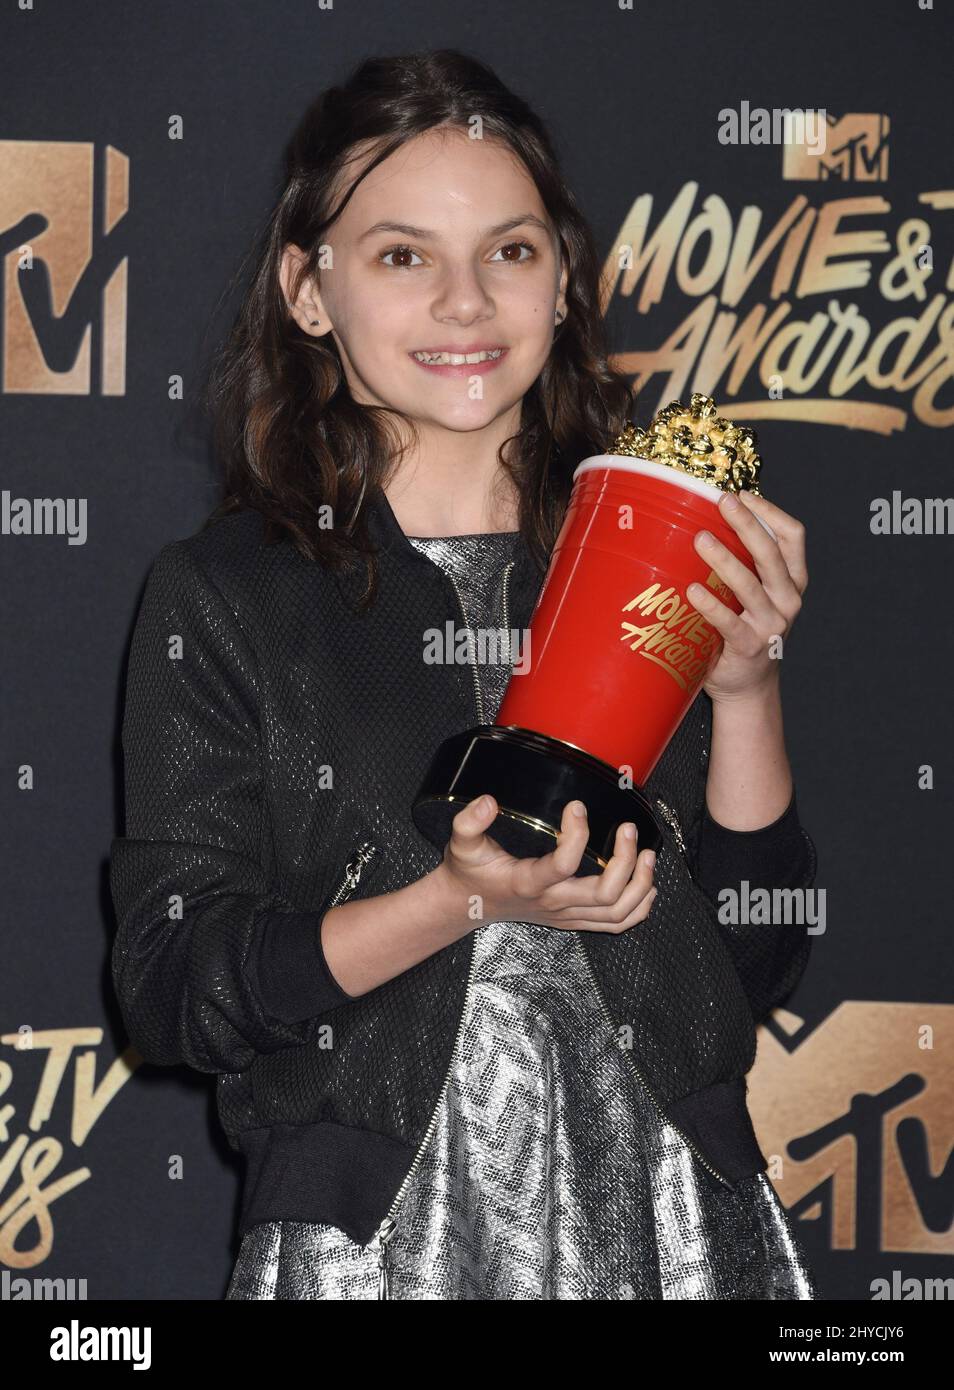 Dafne Keen in the press room at the 2017 MTV Movie and TV Awards held at the Shrine Auditorium in Los Angeles, USA Stock Photo